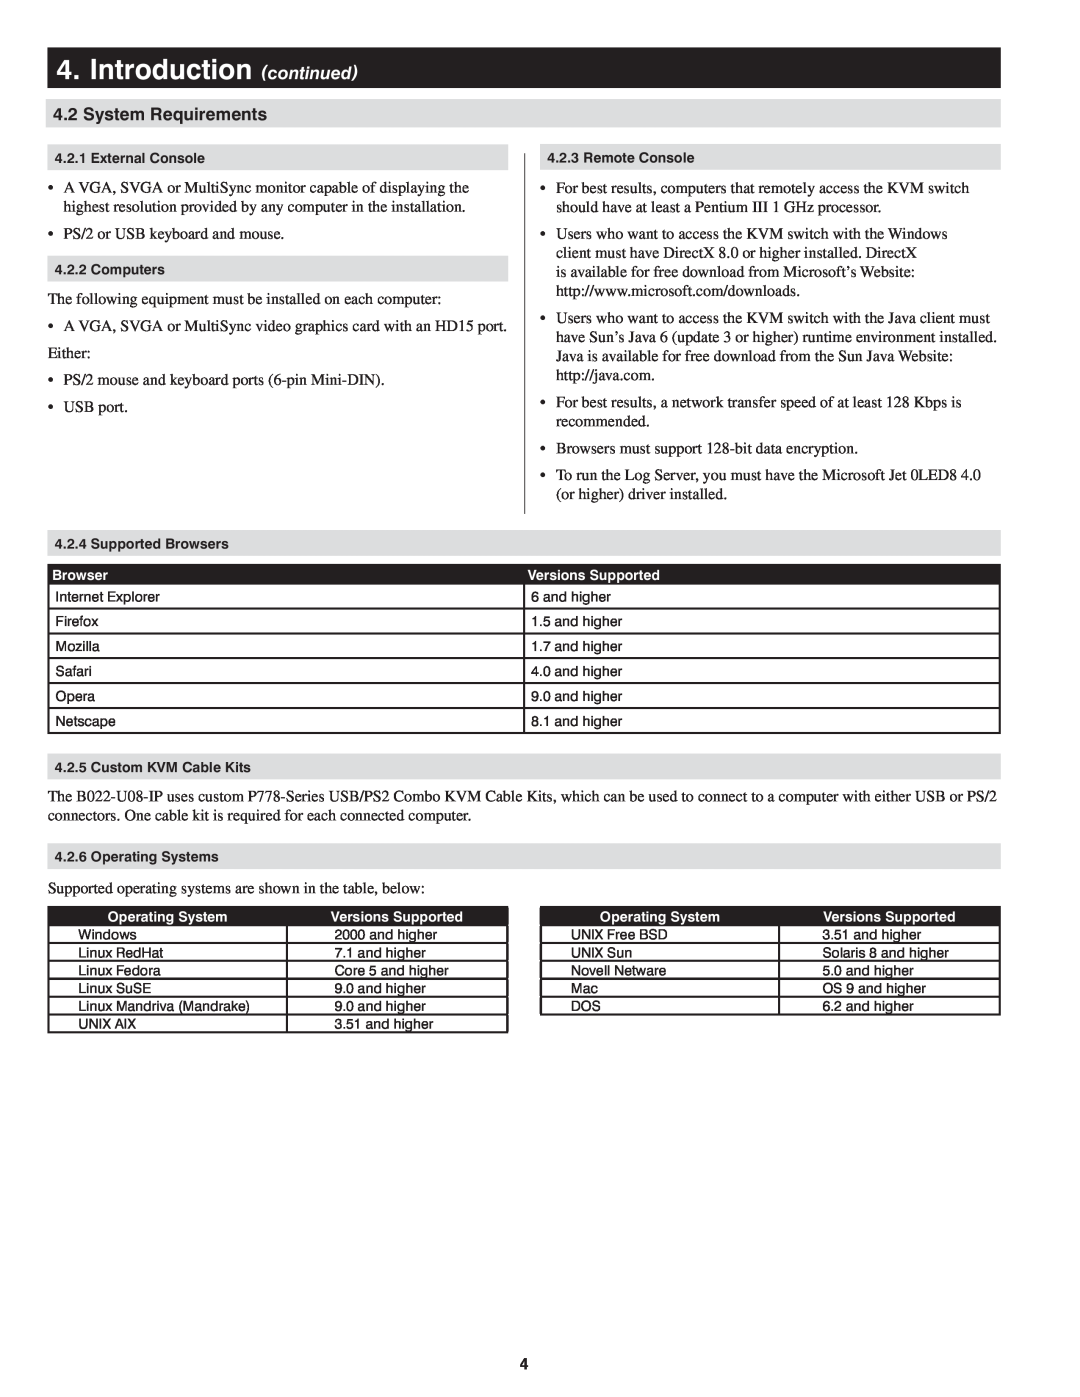 Tripp Lite B022-U08-IP owner manual Introduction continued, System Requirements 